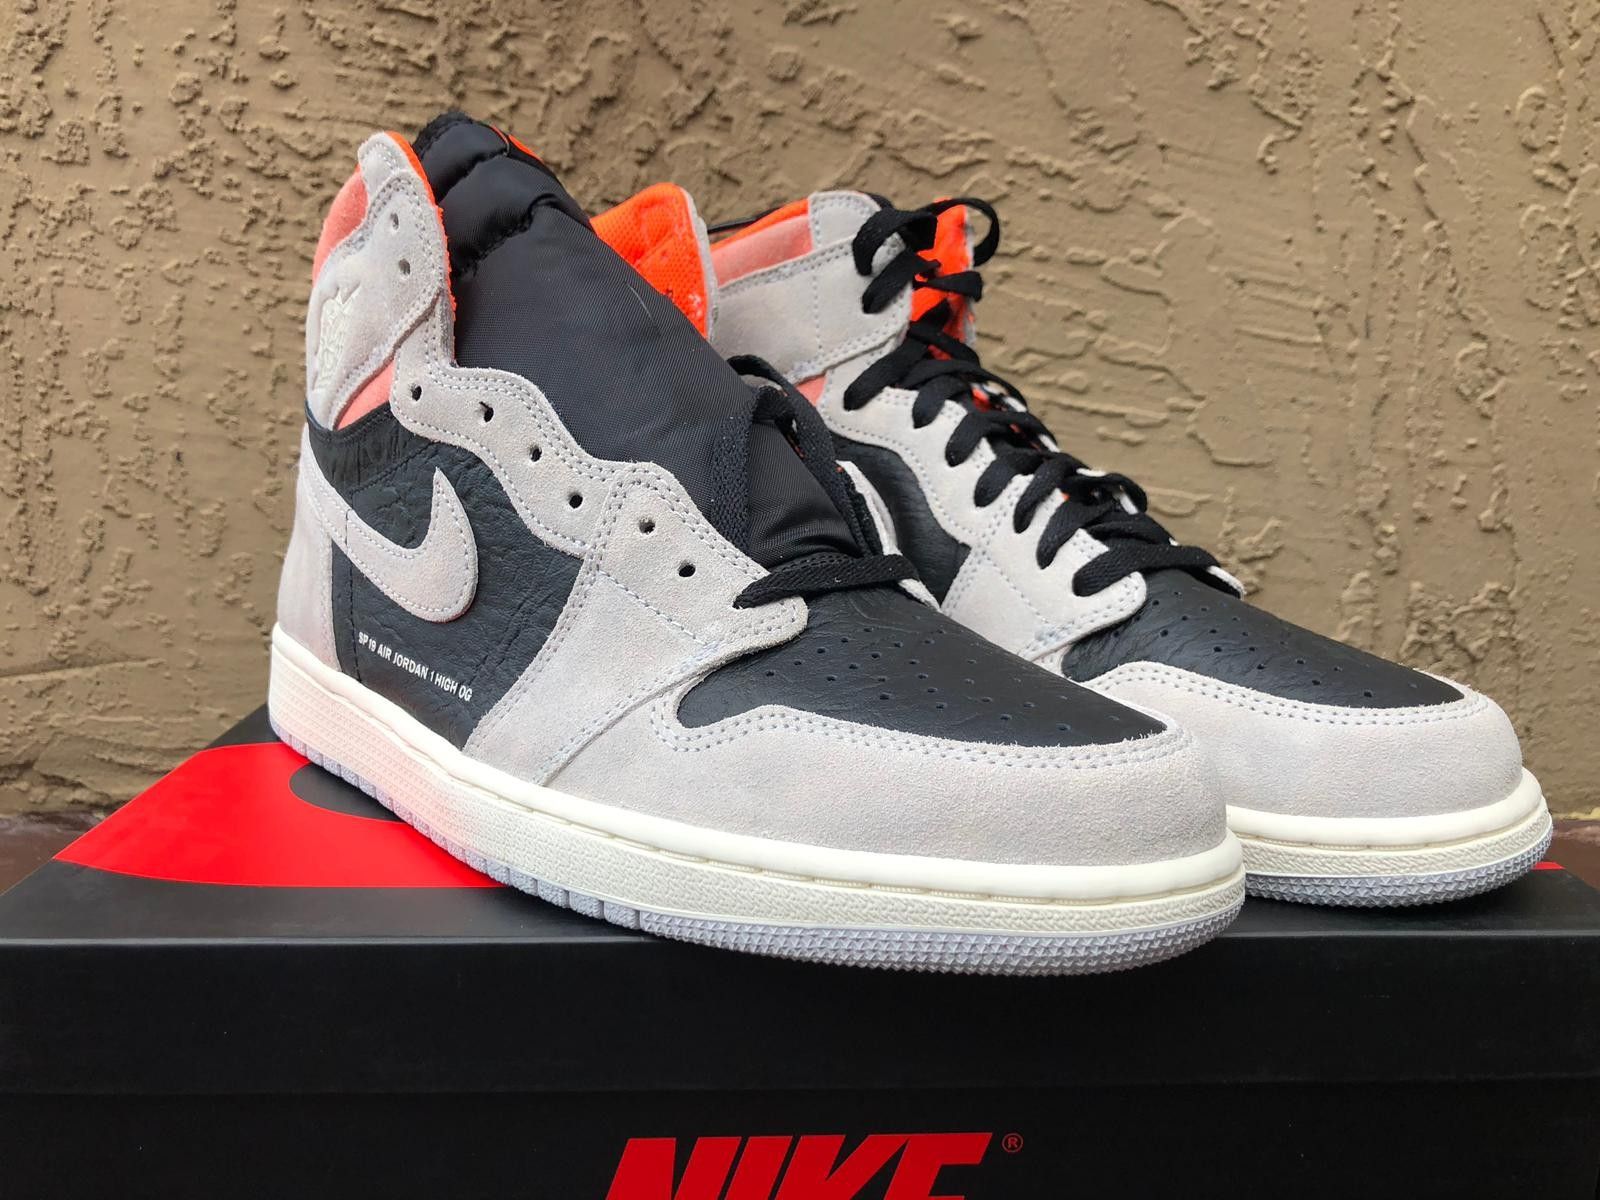 Get hype like never before with these new Jordan 1 Retro High Neutral Grey Hyper Crimson. This AJ1 size 12